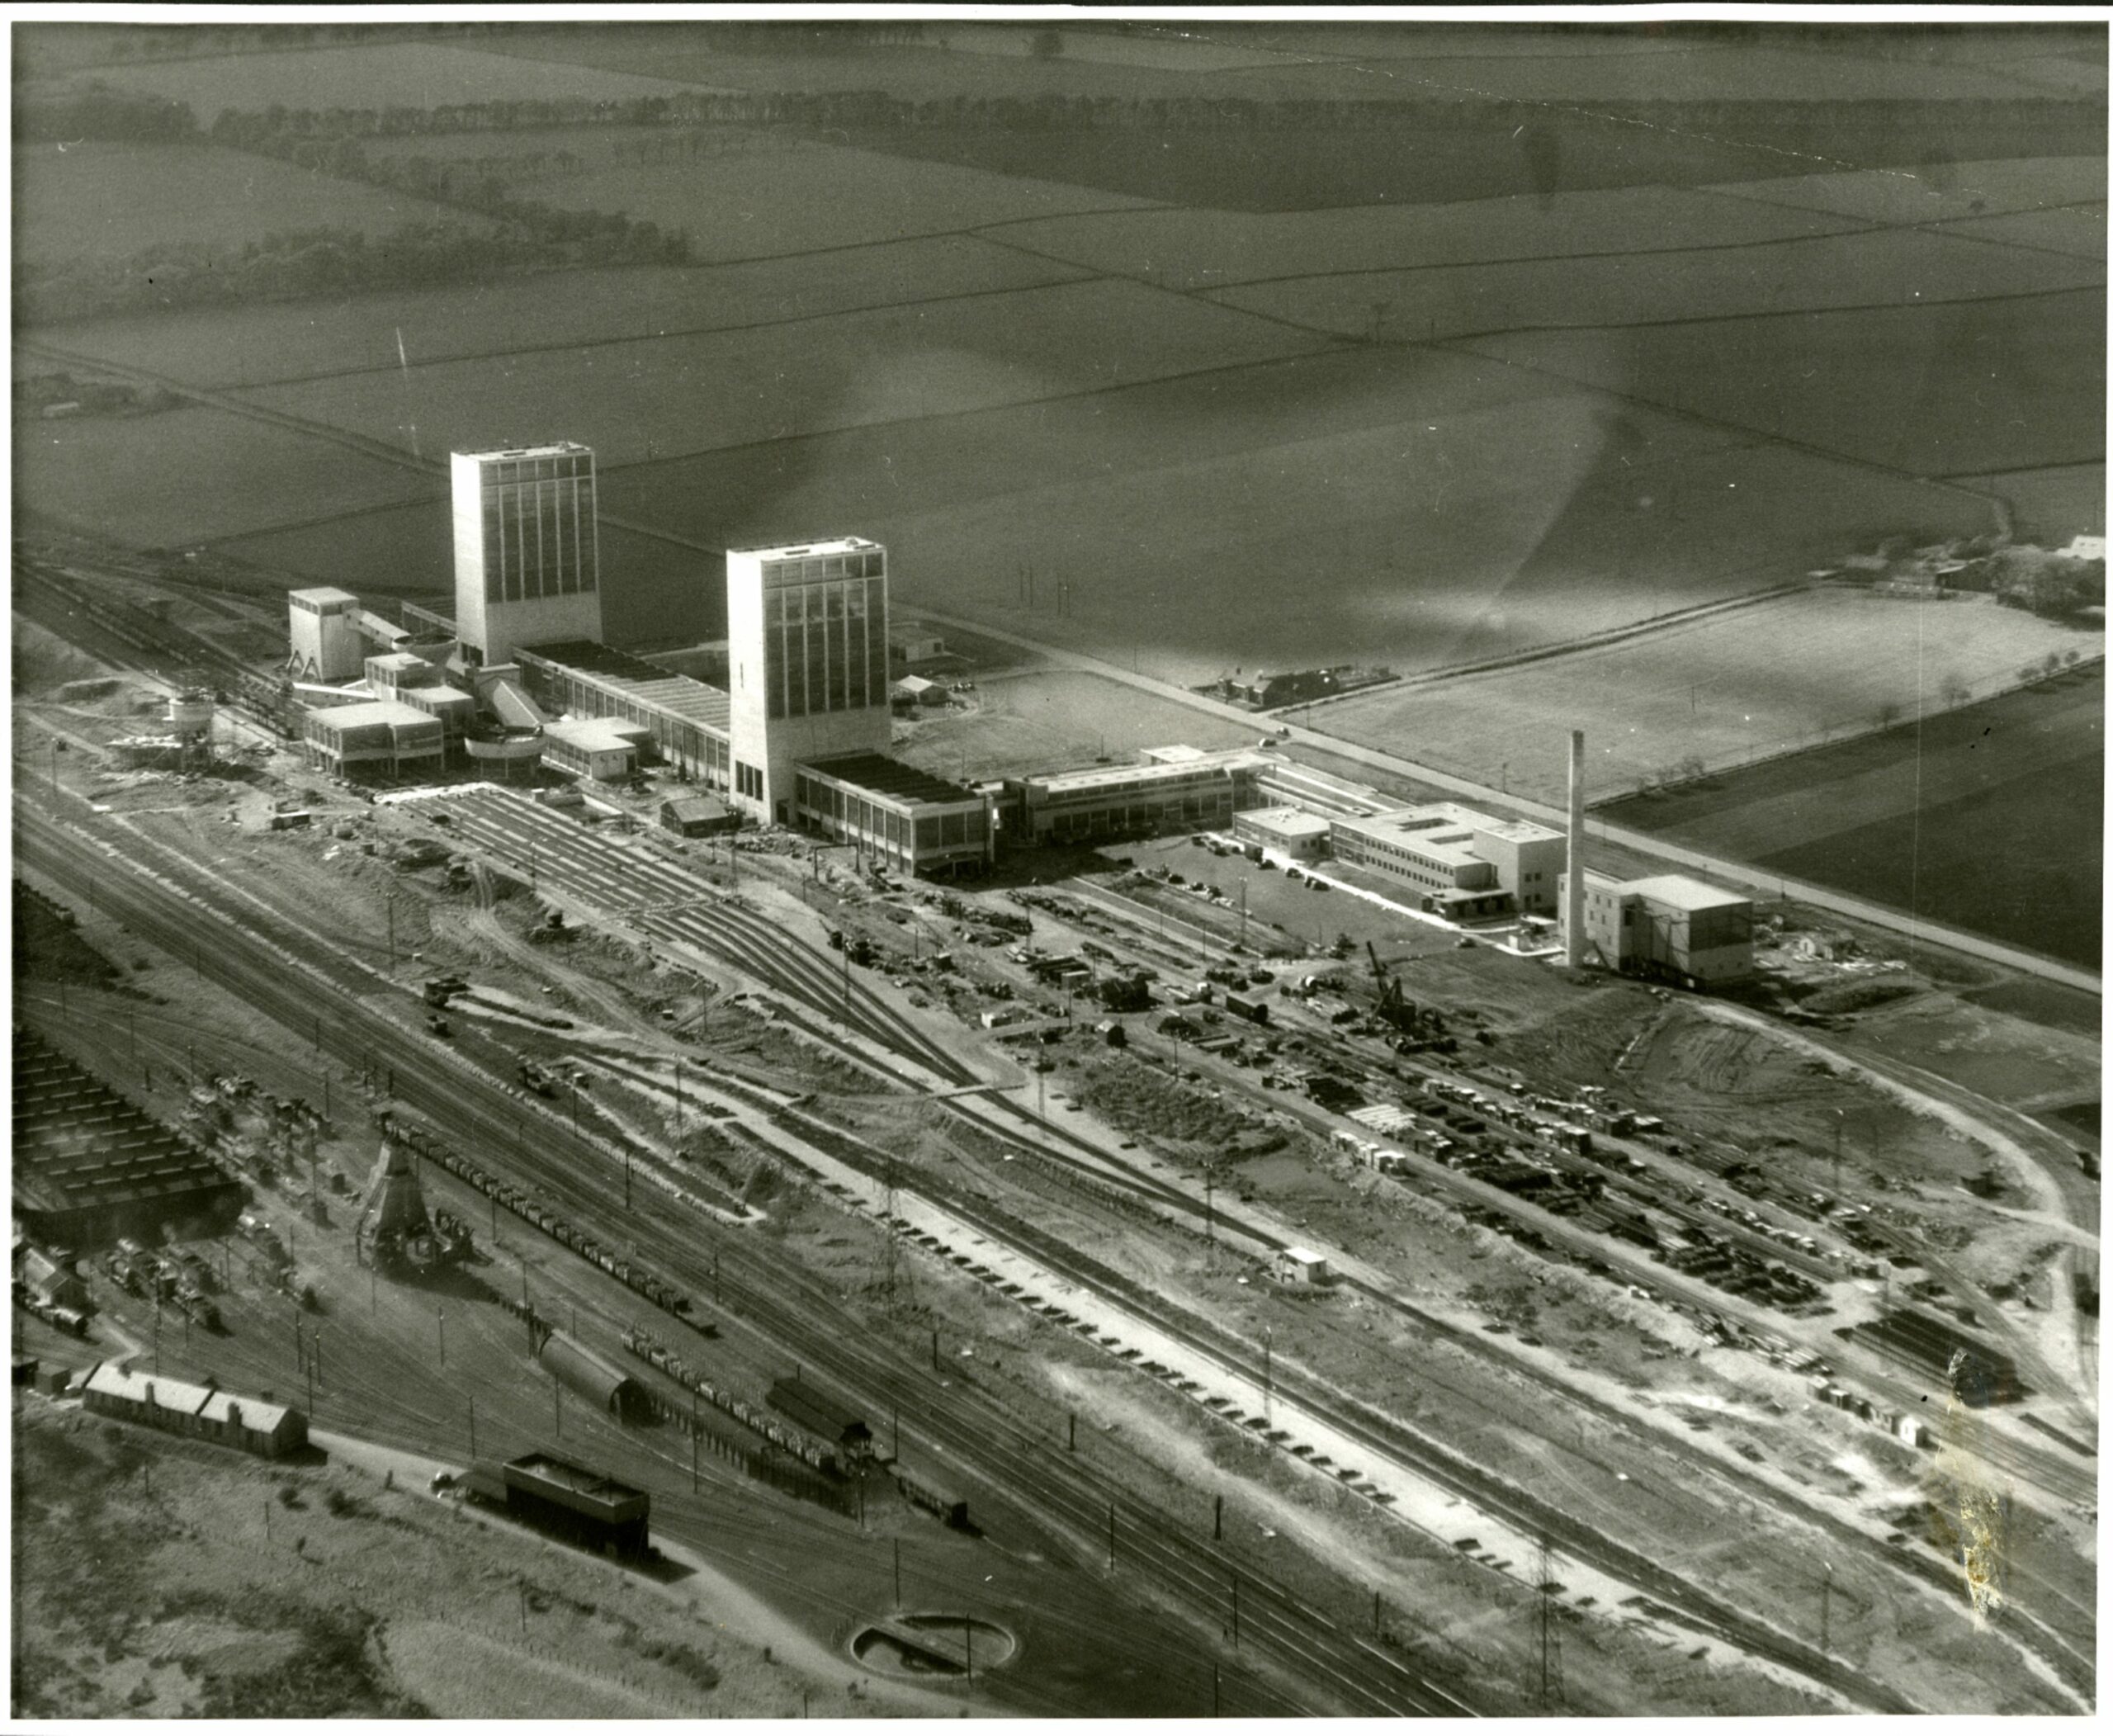 Rothes Colliery from above in May 1957.